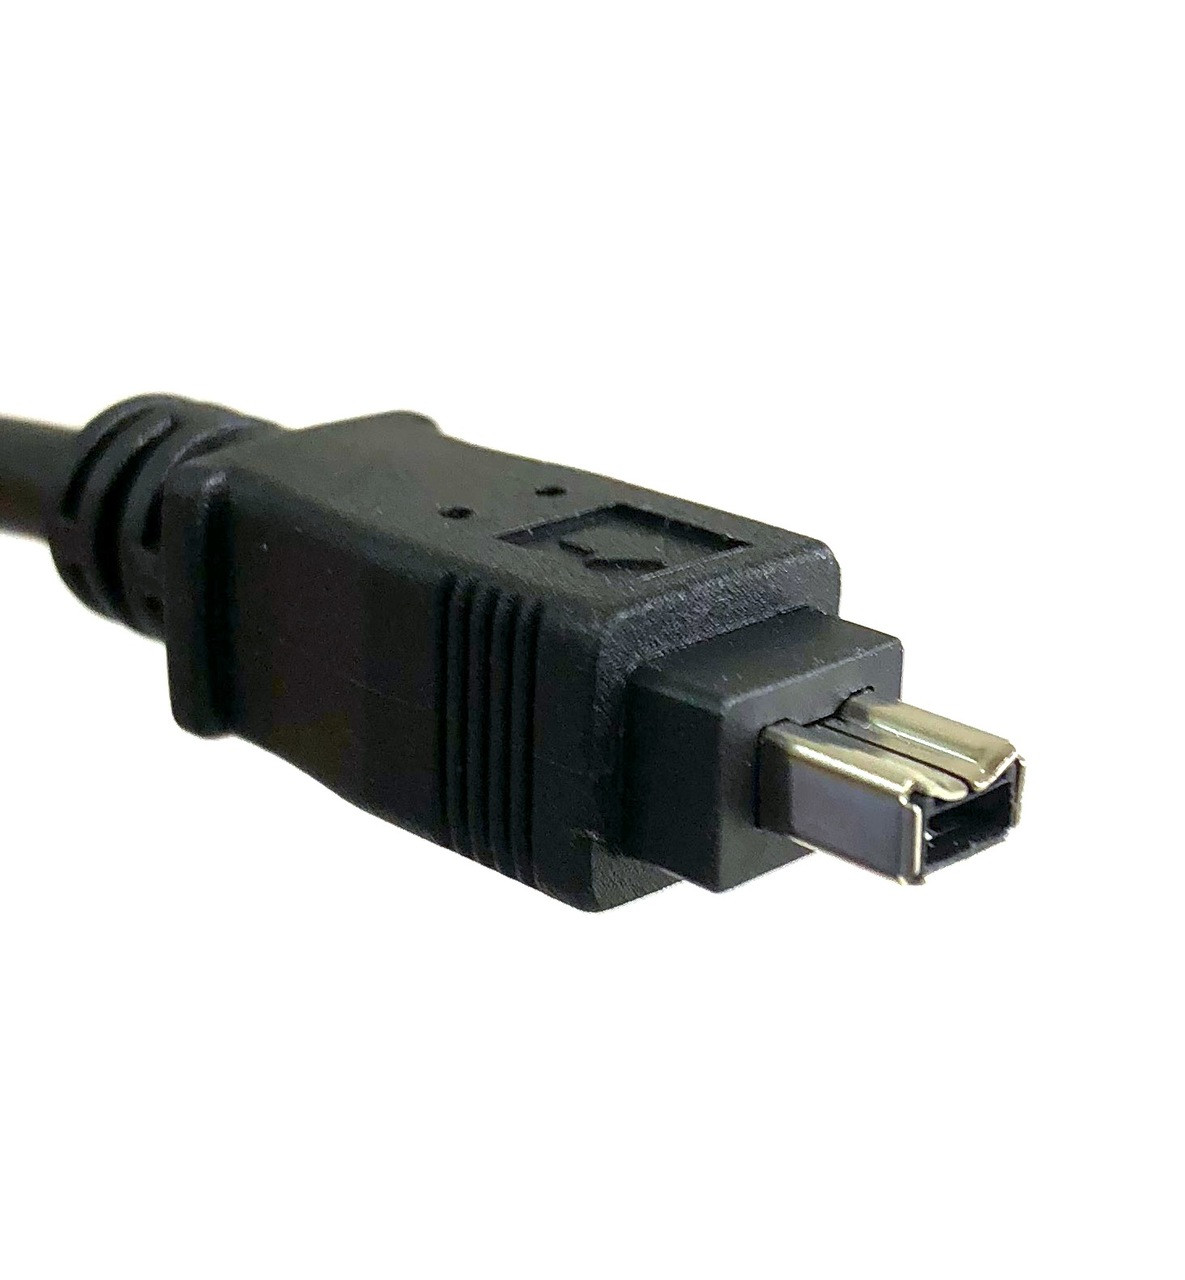 FireWire (IEEE 1394a) 6-Pin to 4-Pin Cable - Micro Connectors, Inc.